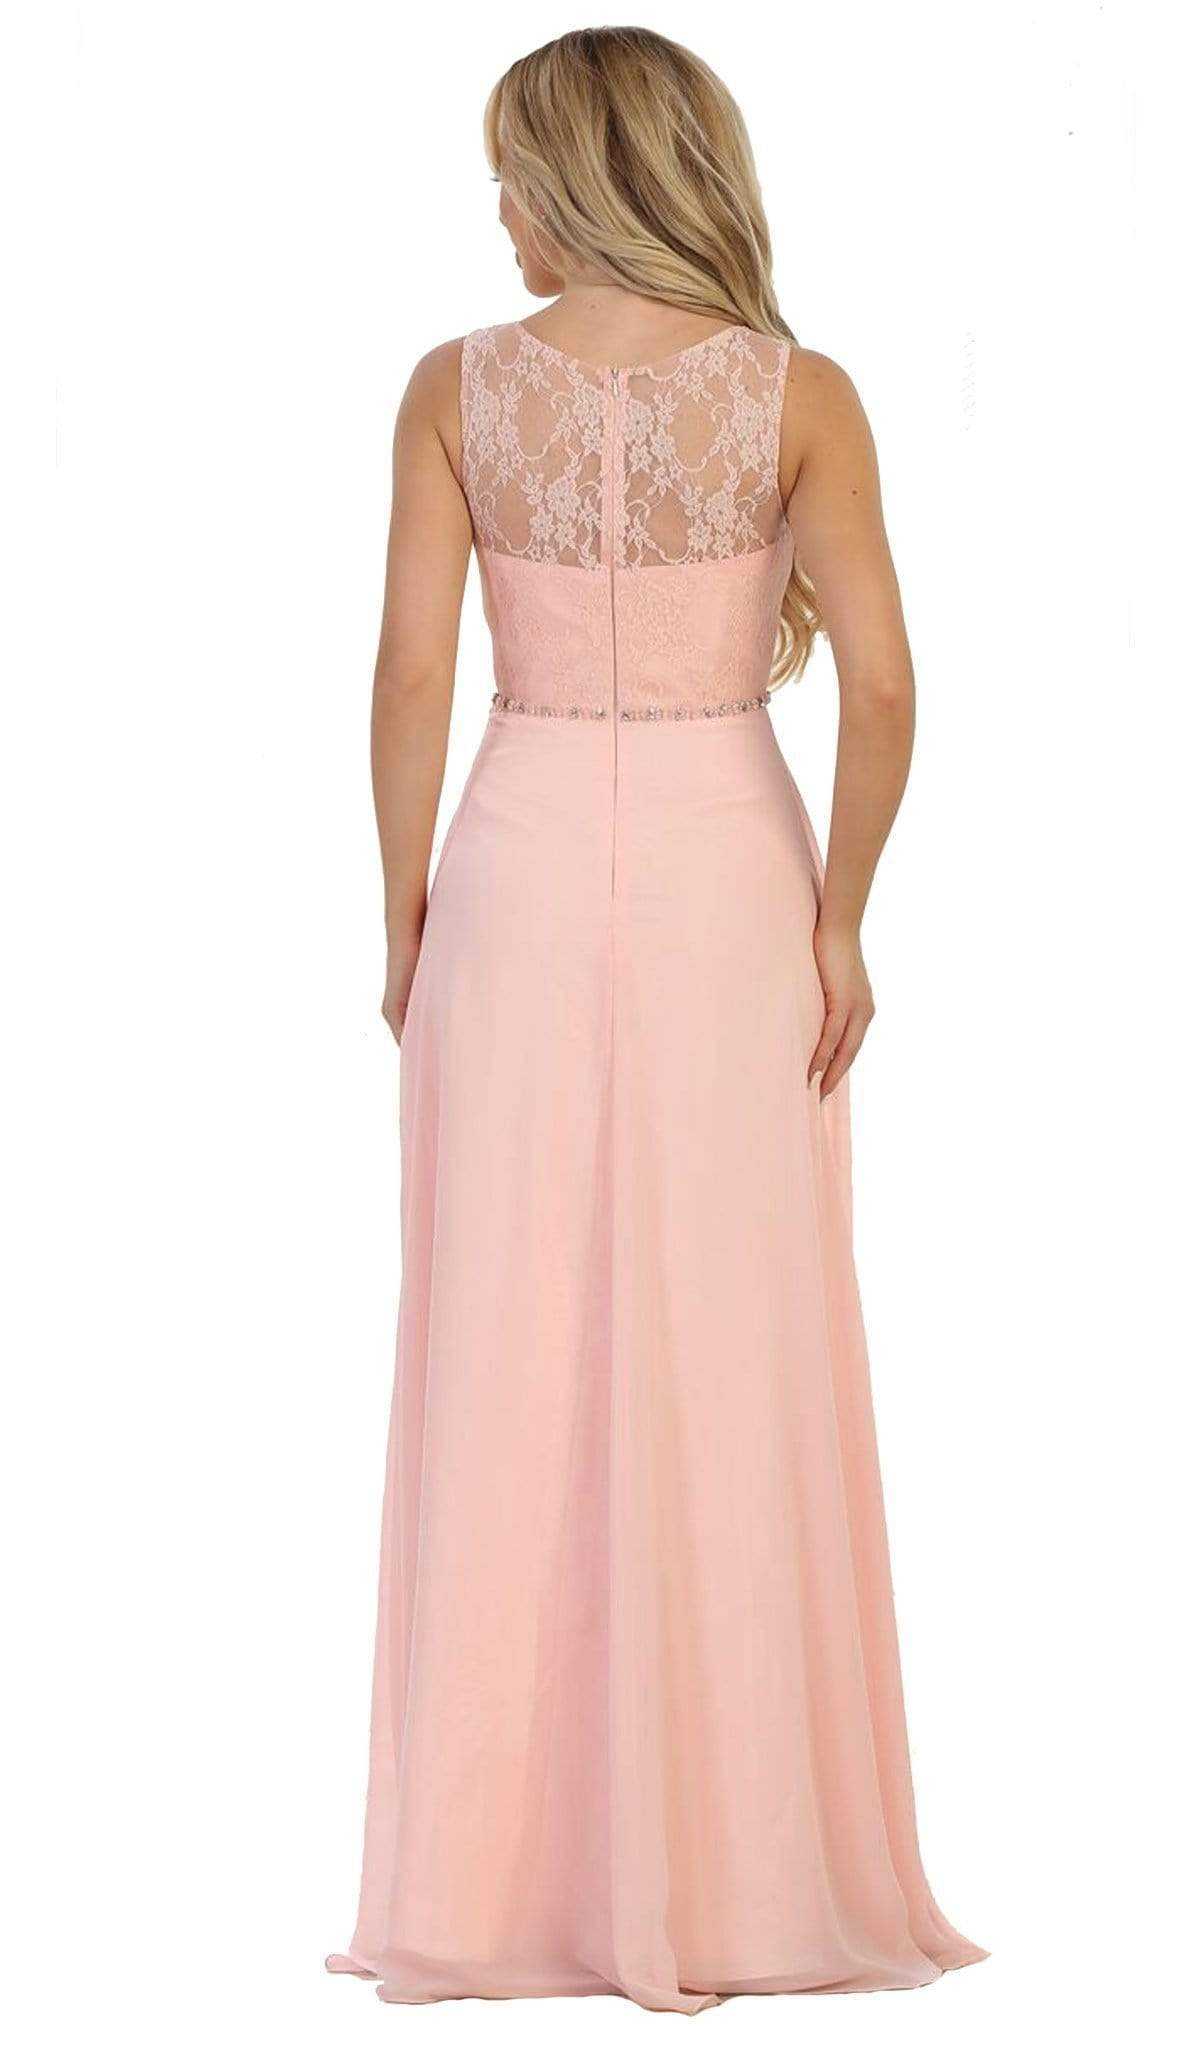 May Queen, May Queen - Sleeveless Illusion Lace Evening Dress